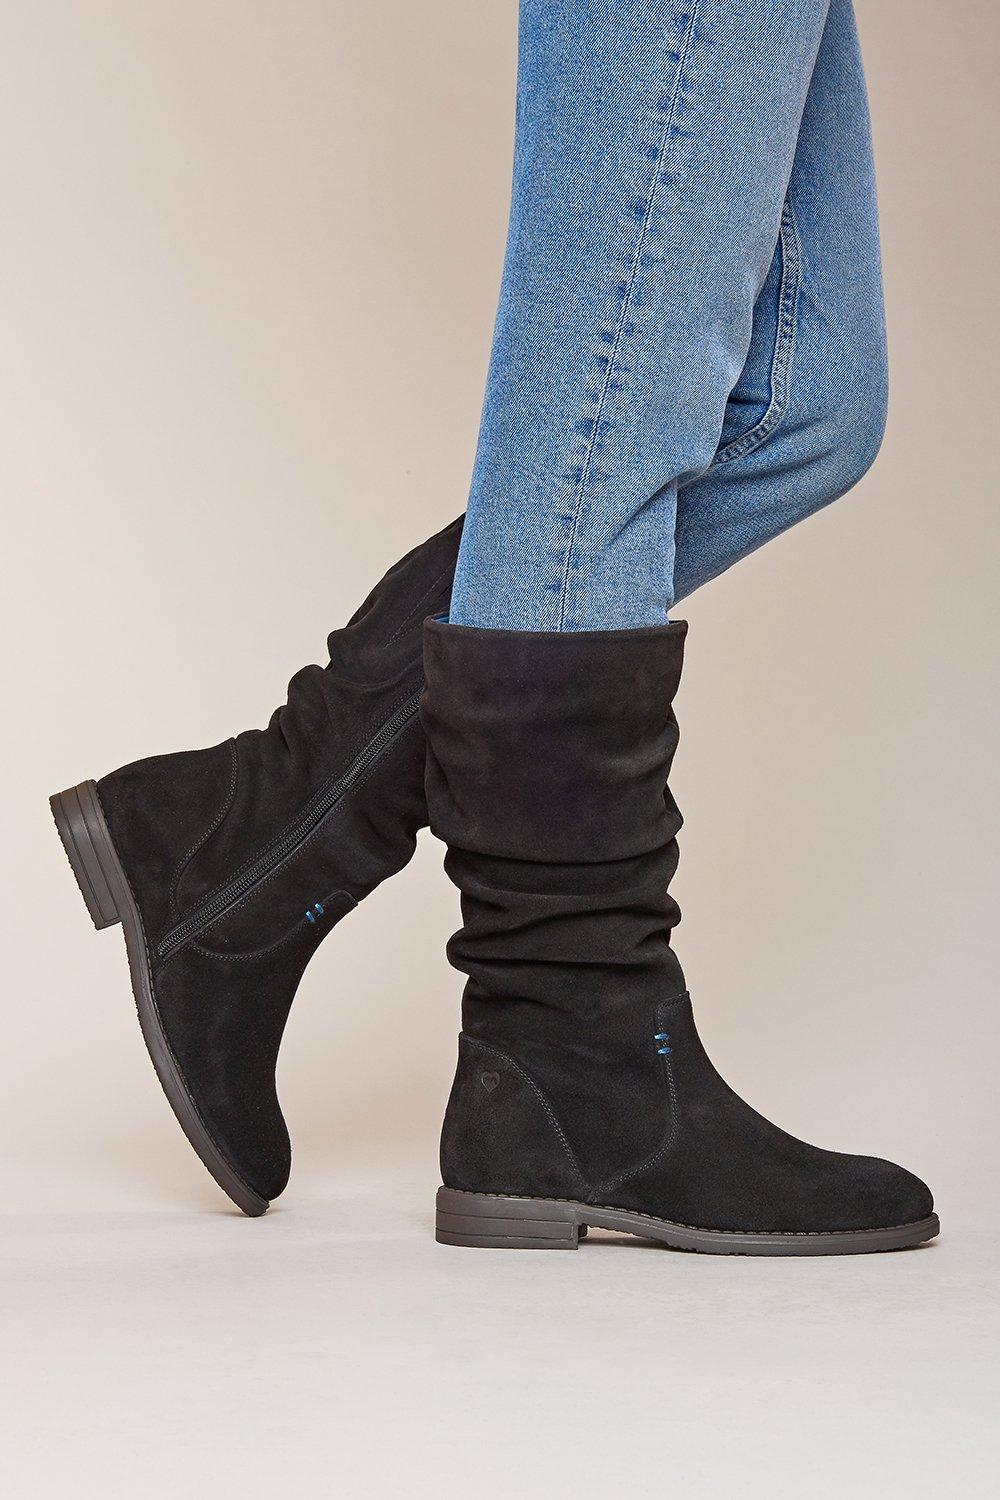 Boots | 'Glacier Suede 2' Ladies Ruched Suede Boots | Moshulu